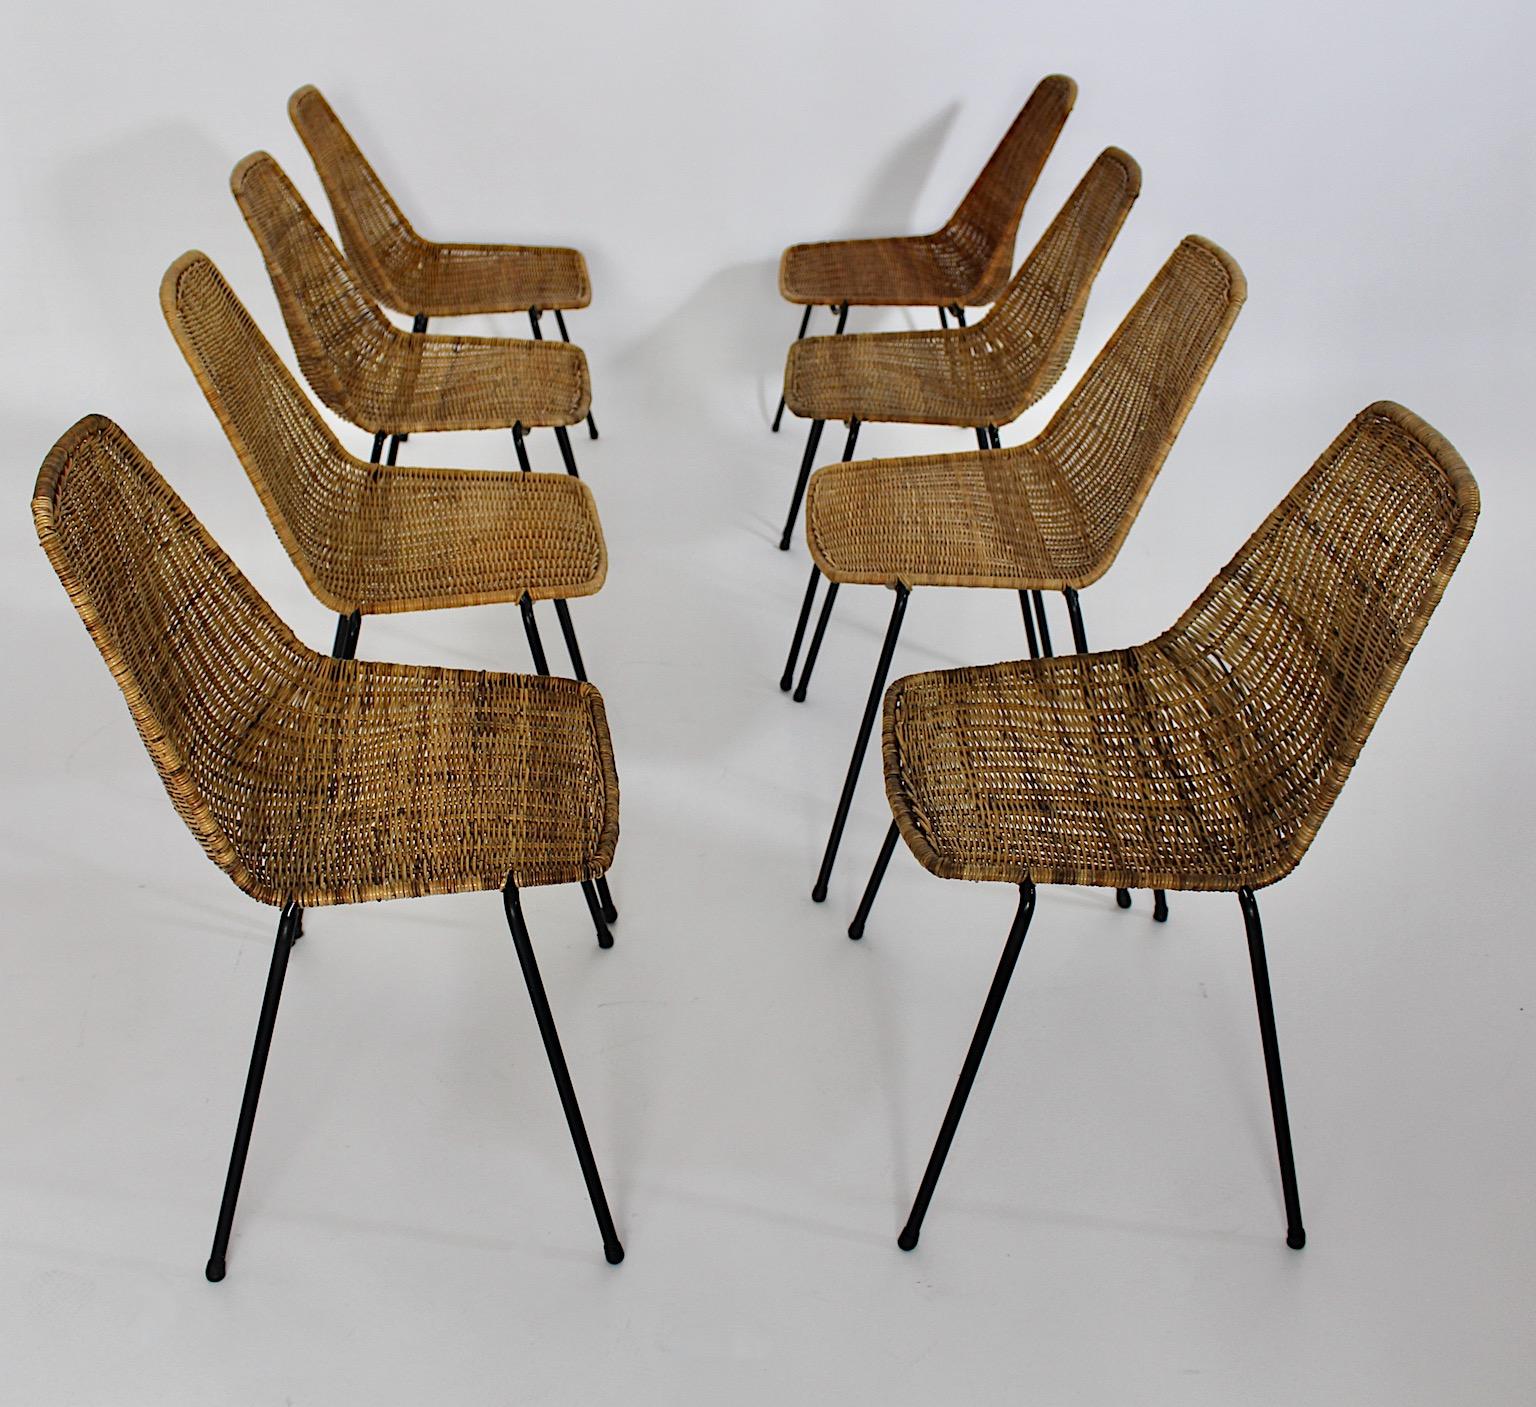 Organic vintage and authentic eight dining chairs or chairs from rattan and metal by Gian Franco Legler 1950s.
A fabulous rare and authentic eight ( 8 ) dining chairs or easy chairs with a very comfortable seat shell from fine weaved rattan and